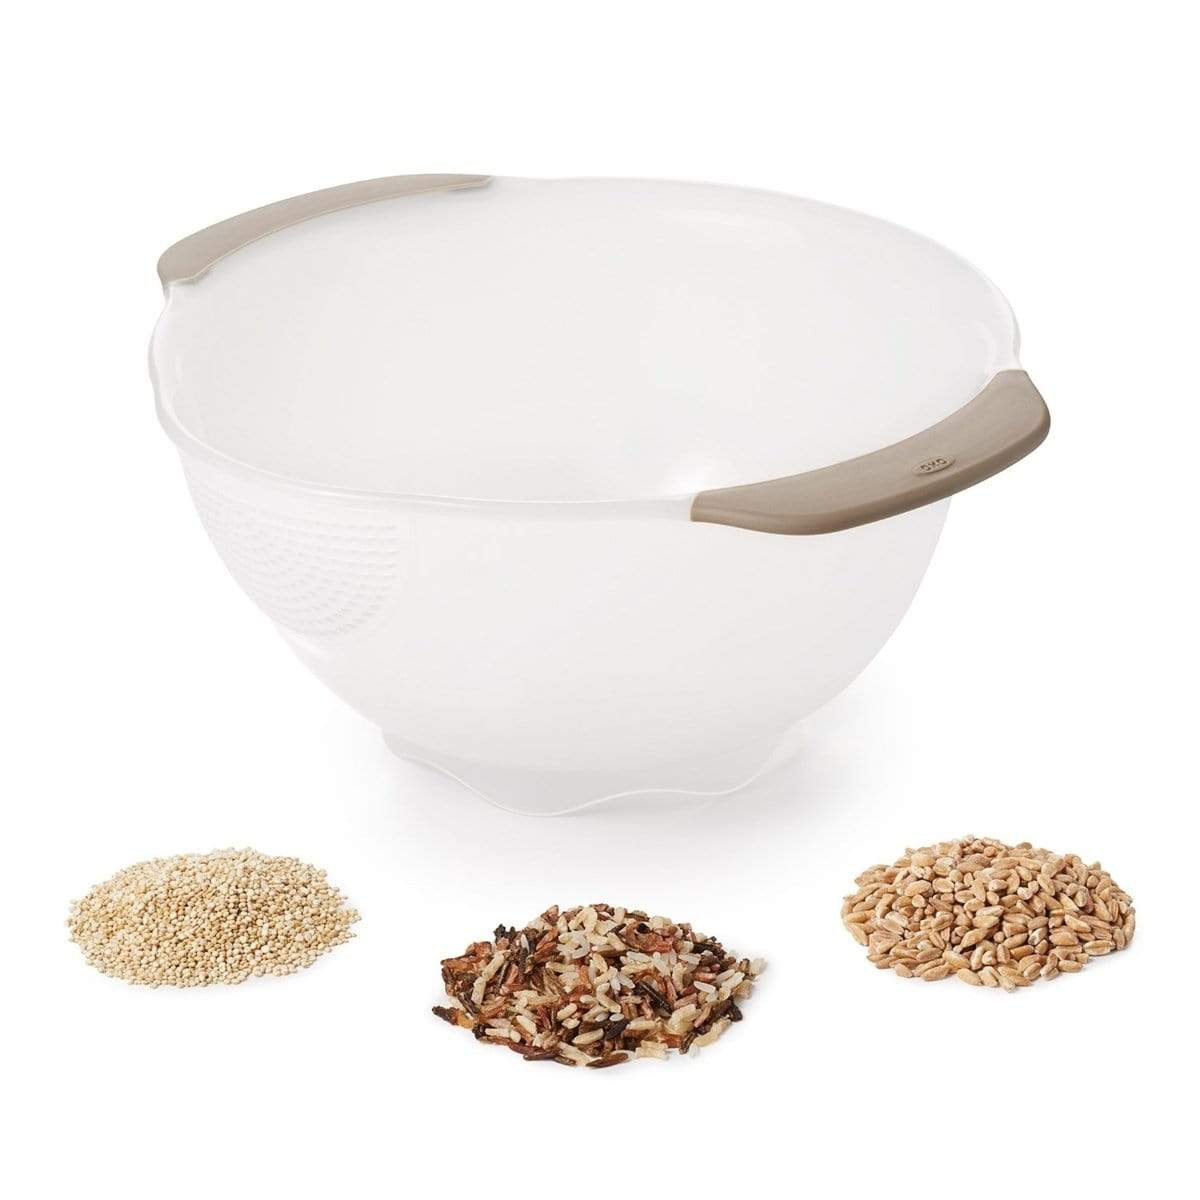 OXO Good Grips Batter Bowl - Spoons N Spice